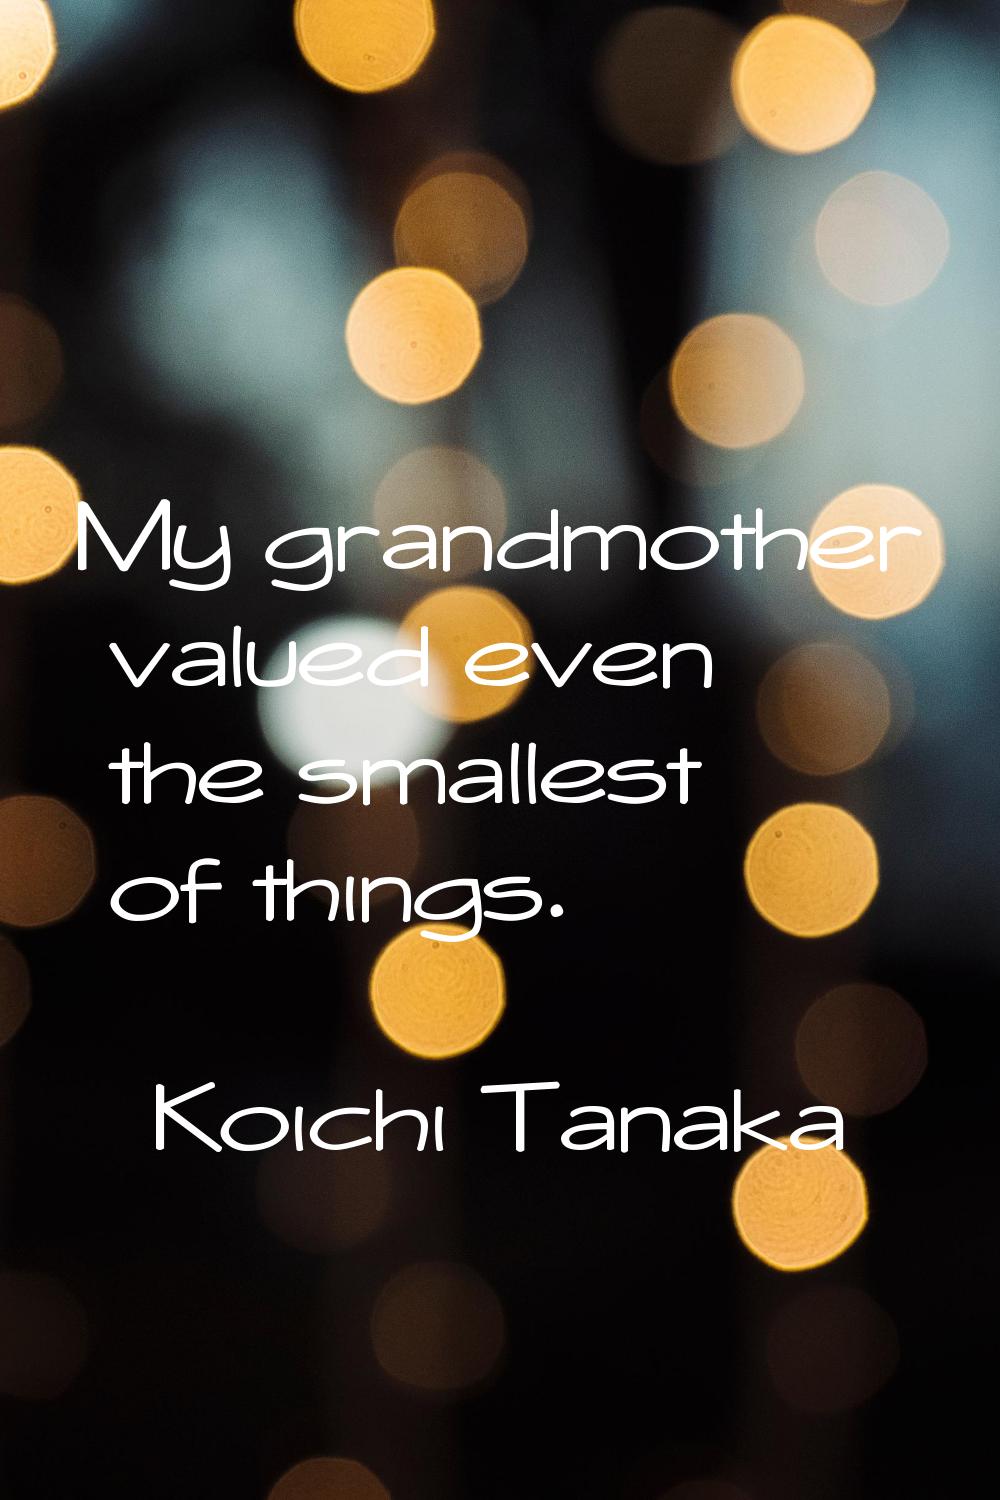 My grandmother valued even the smallest of things.